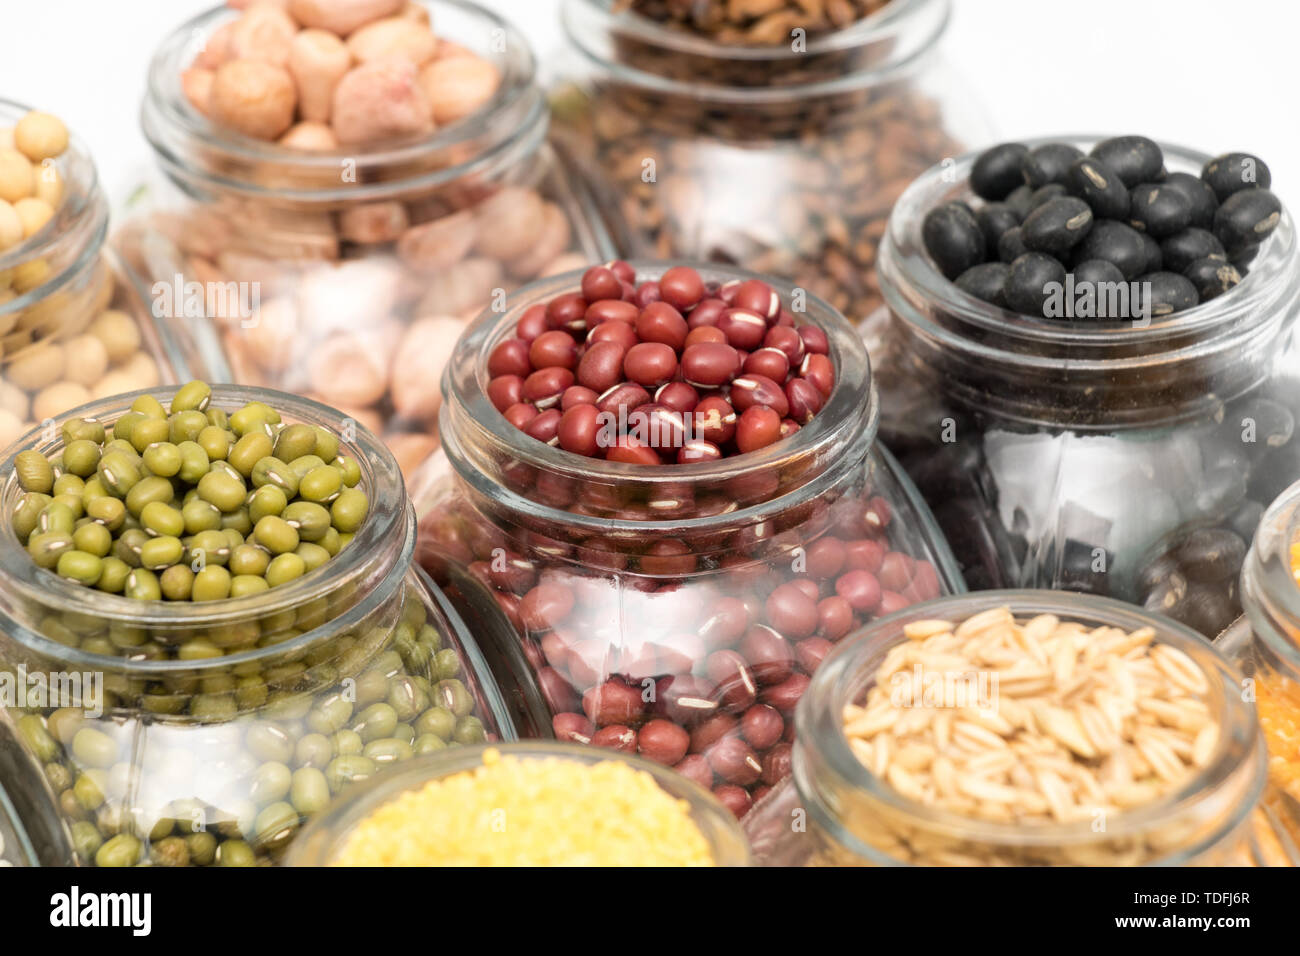 cereals and miscellaneous grains Stock Photo